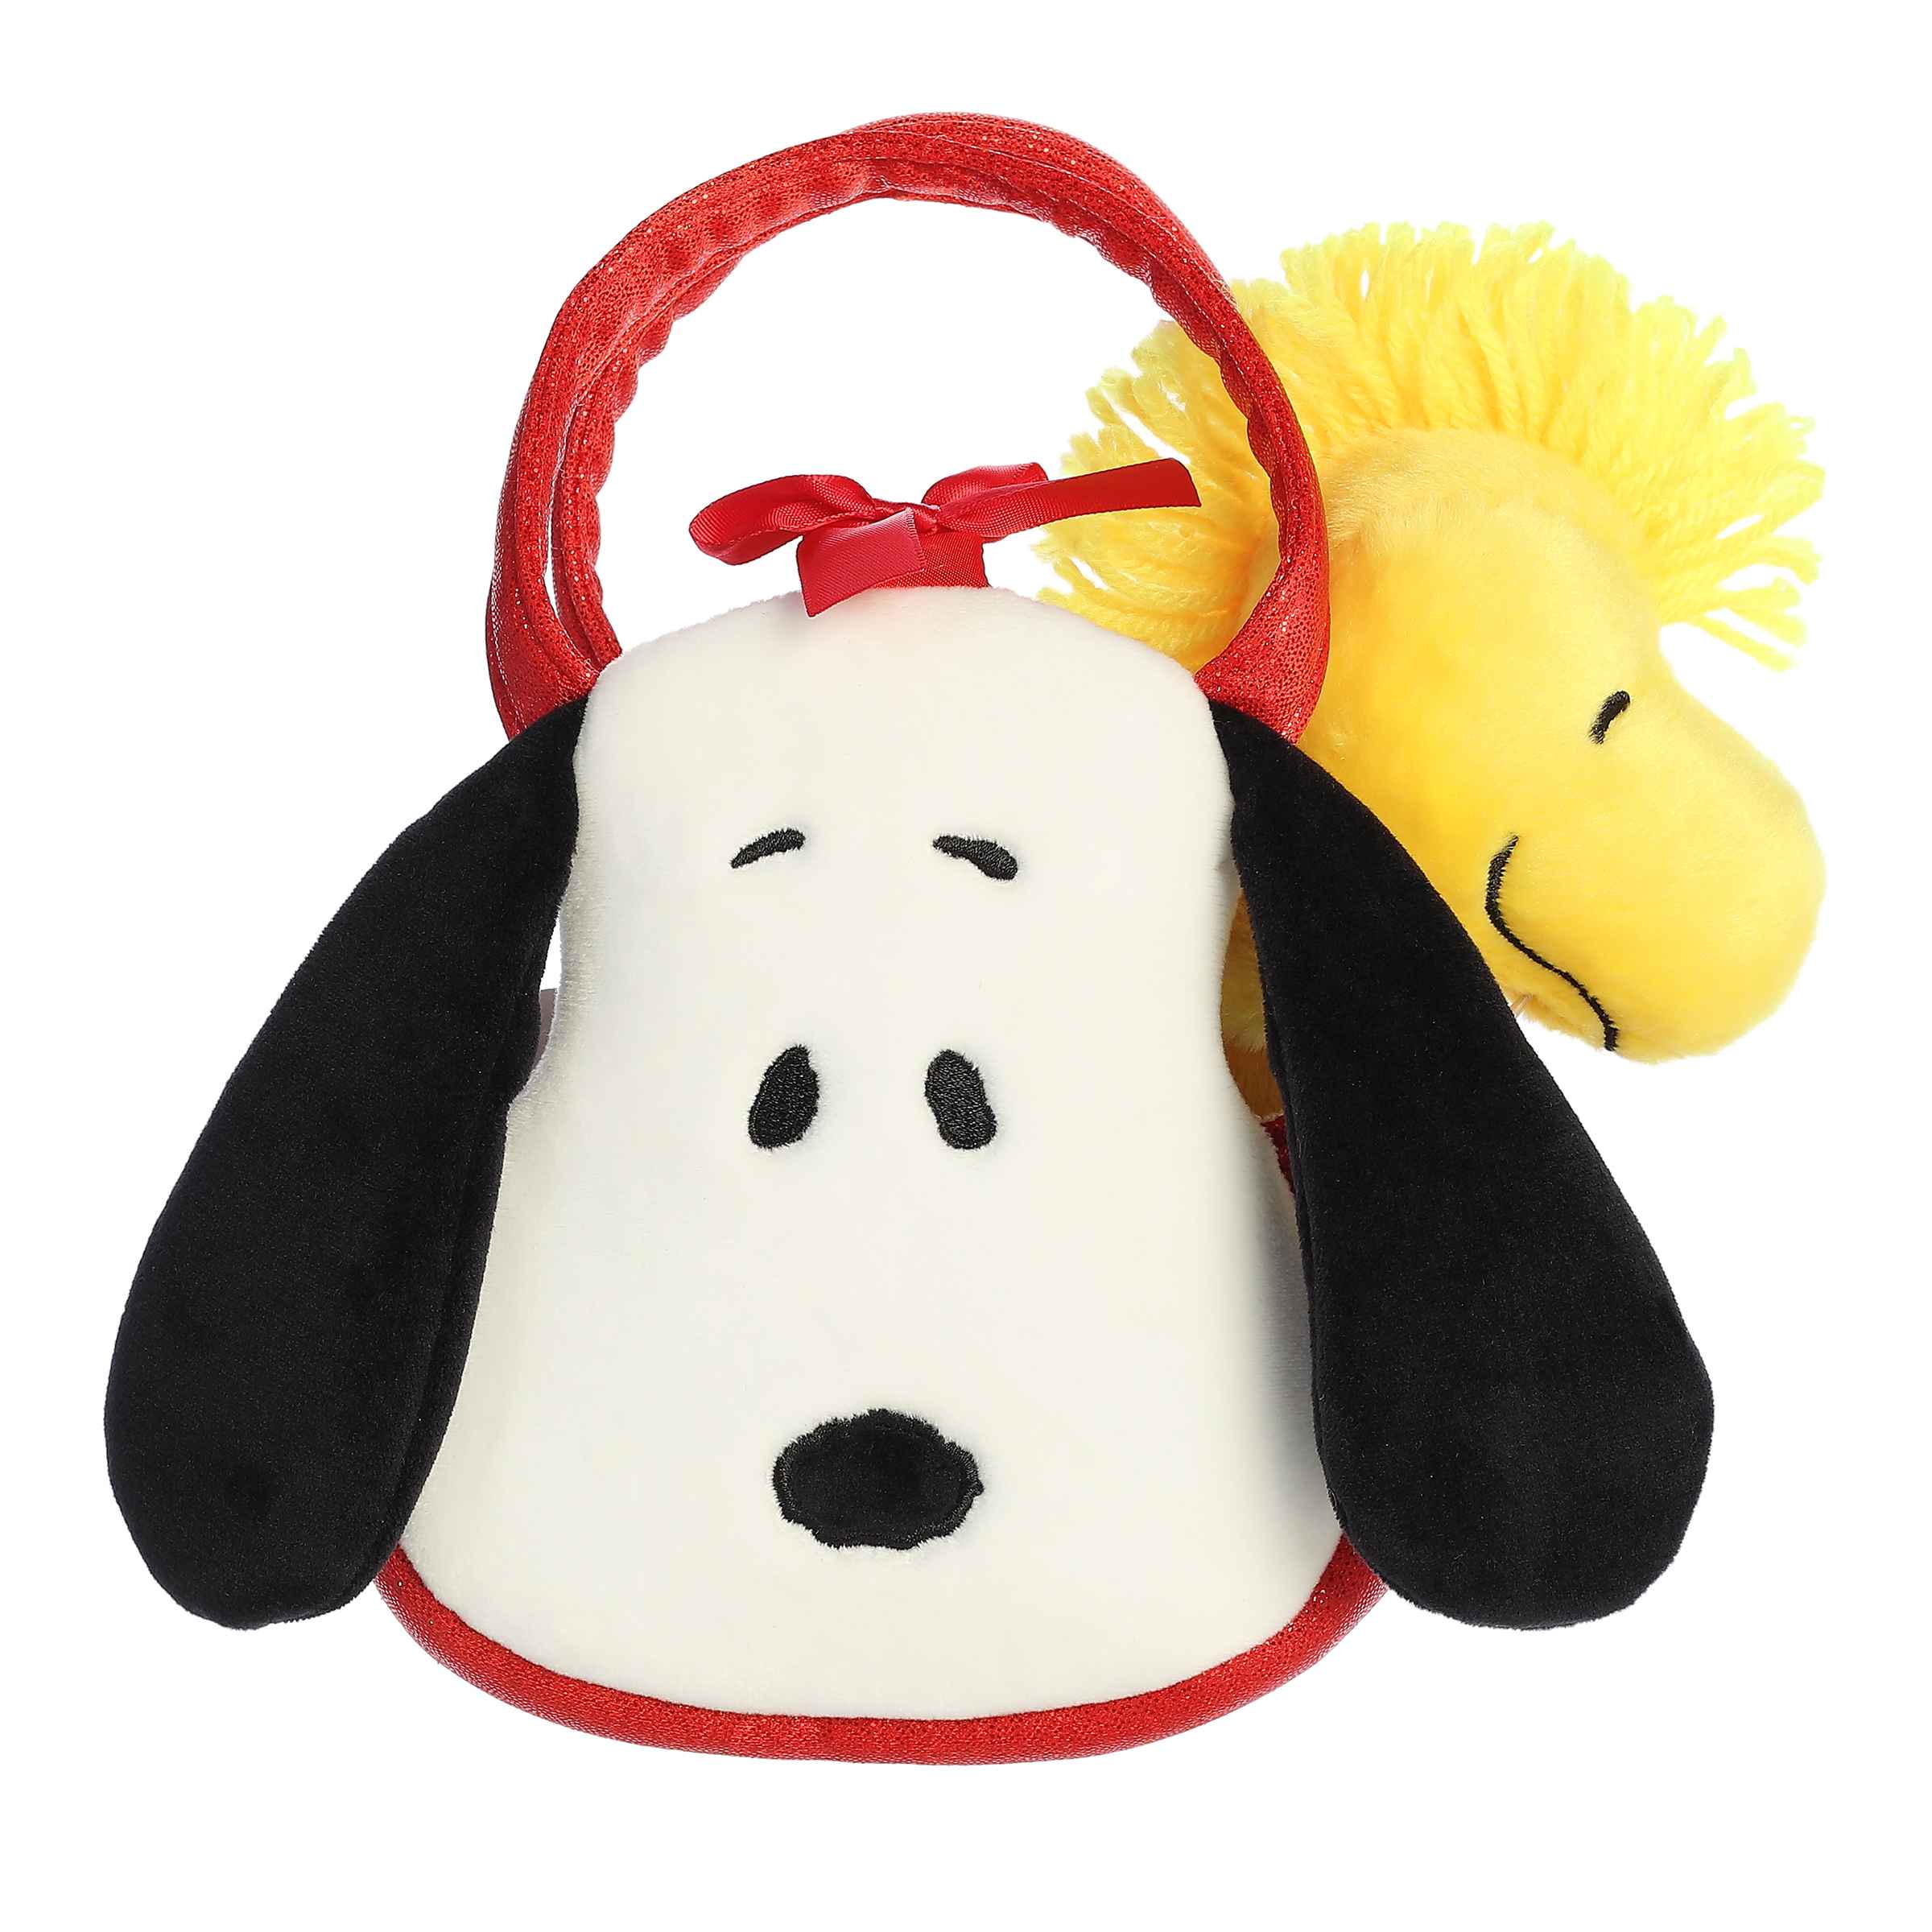 Snoopy plush Fancy Pals carrier set with Woodstock plush from Peanuts, soft fabrics, charming details